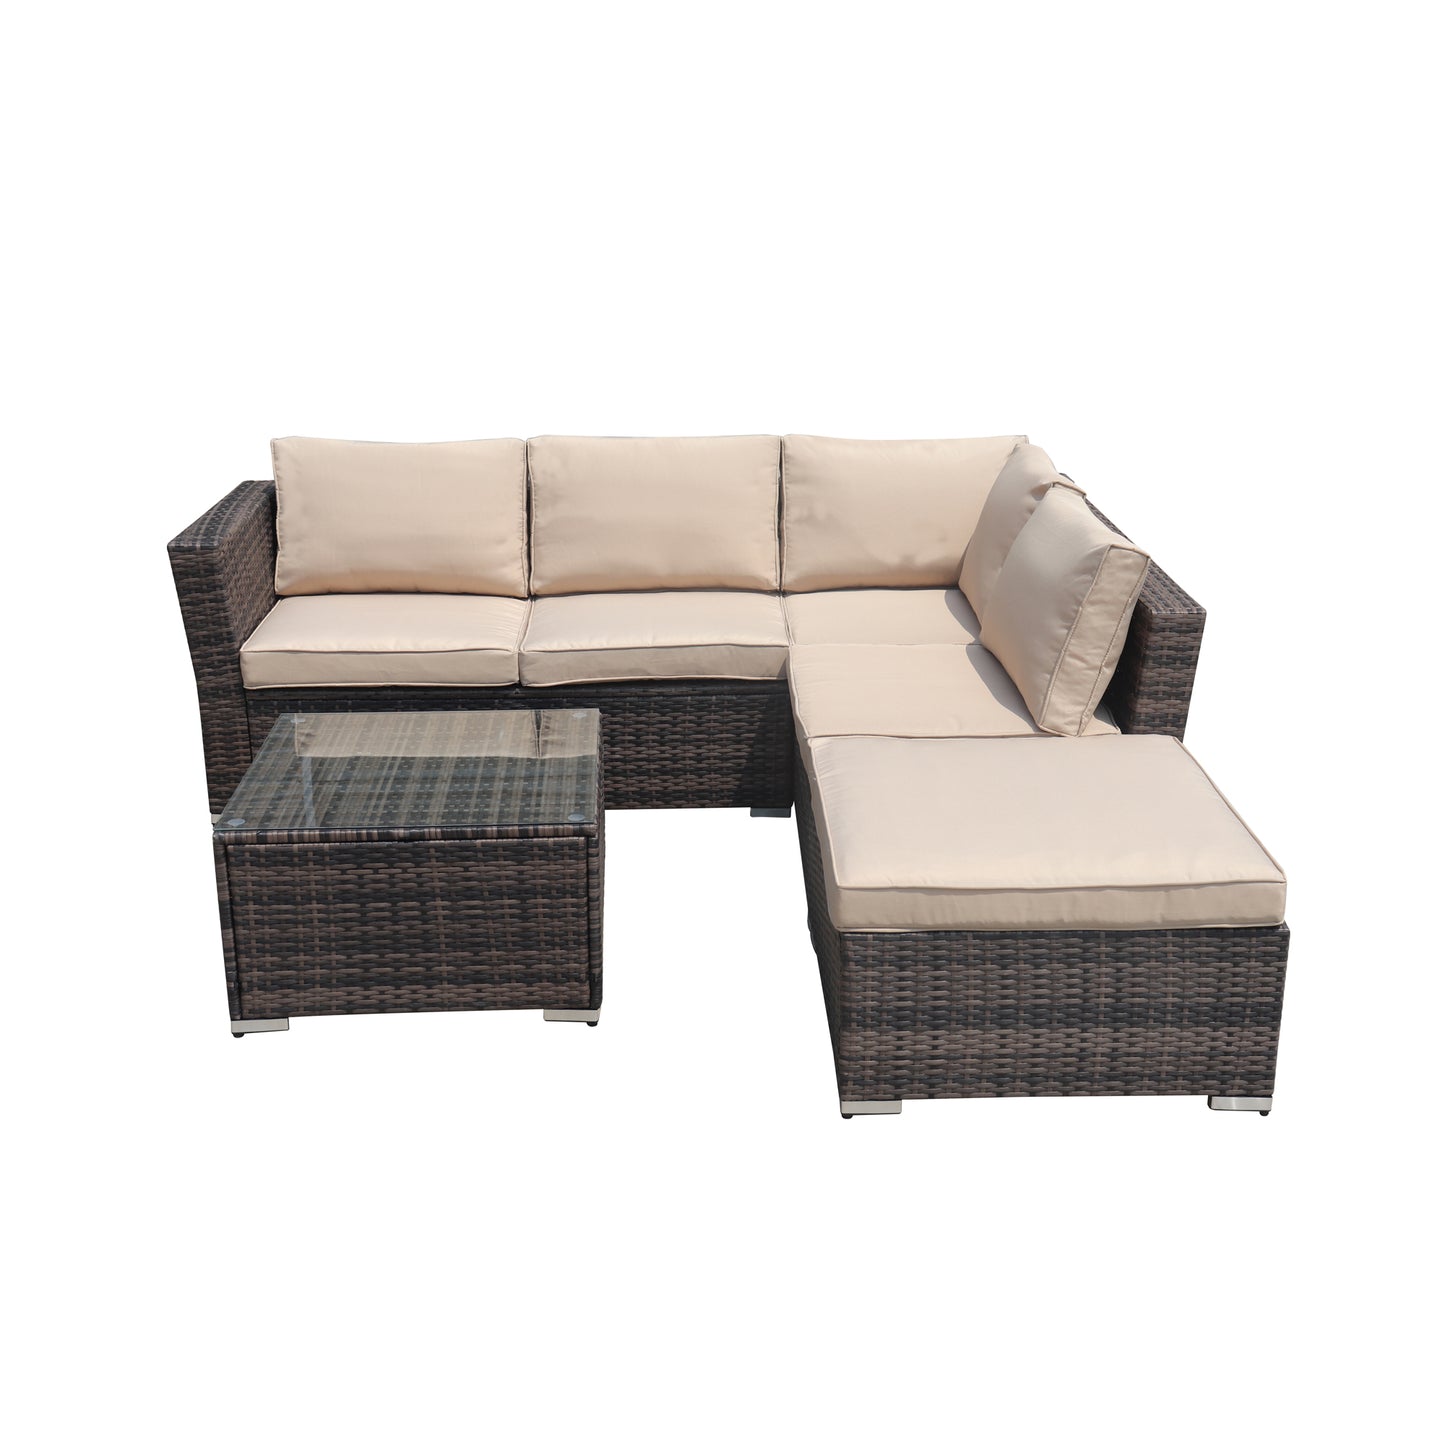 SYNGAR 4 Piece Outdoor Patio Furniture Set, PE Wicker Conversation Set, All Weather Rattan Sofa Set with Tempered Glass Table and Cushion, Sectional Sofa Set for Backyard Garden Poolside